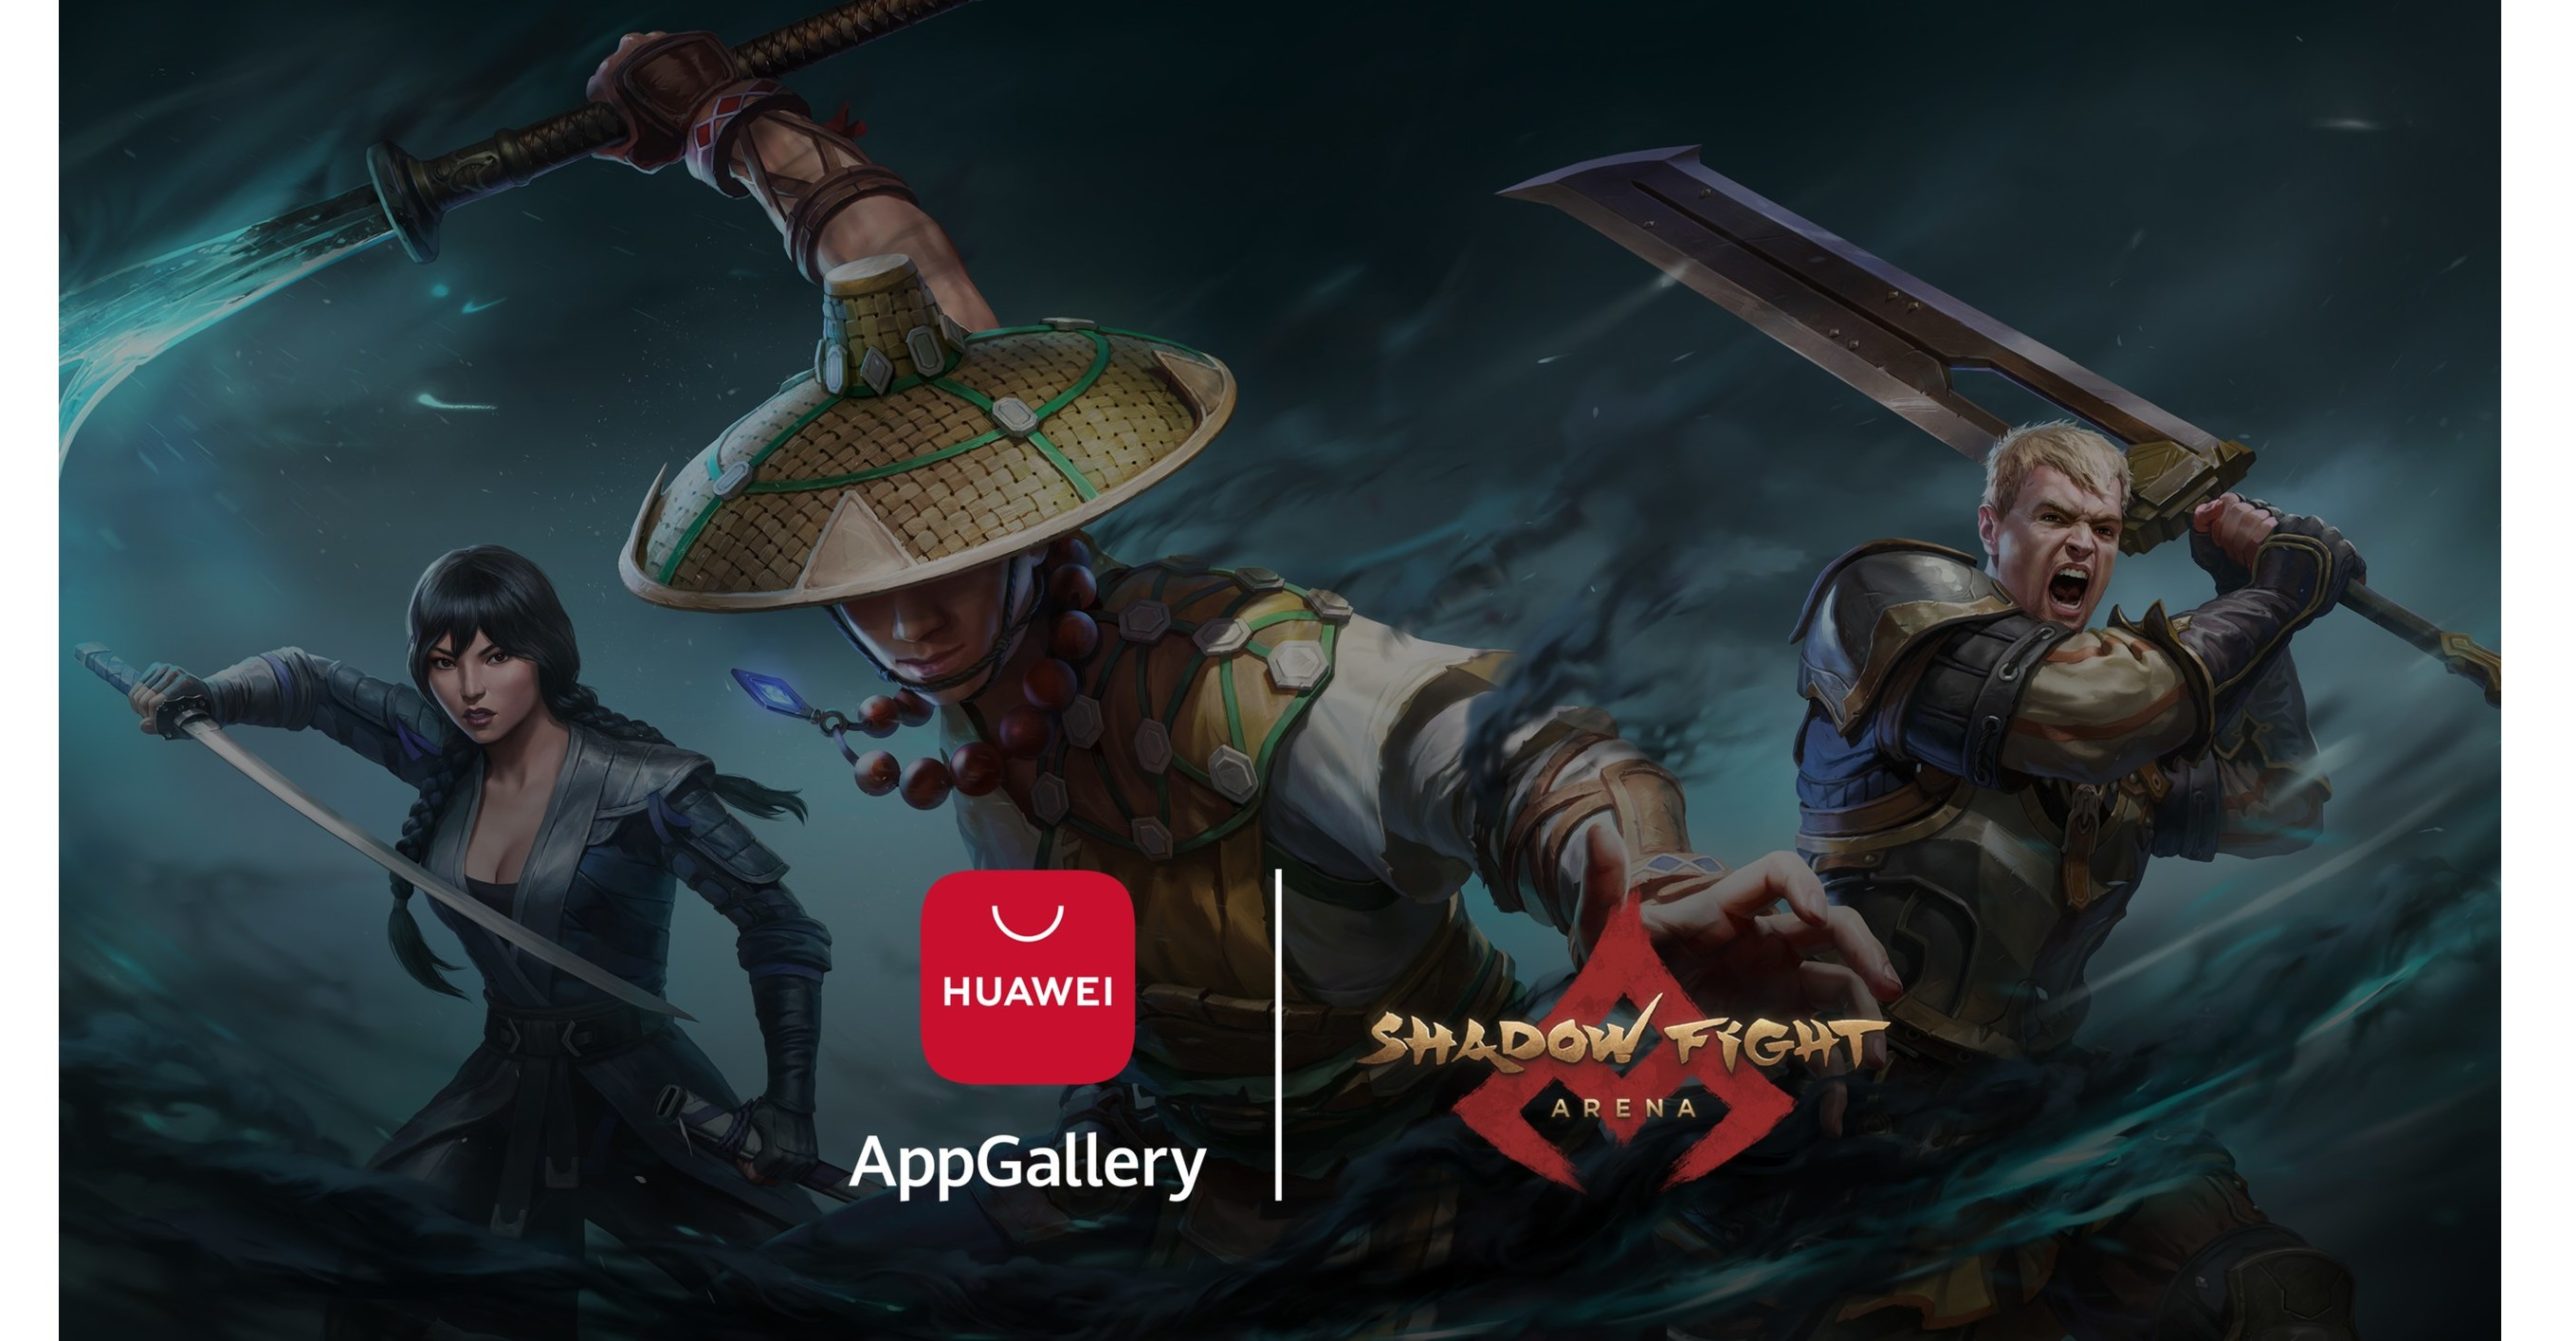 AppGallery Joins Forces with Nekki to Bring Shadow Fight Arena to AppGallery Users - Canada NewsWire